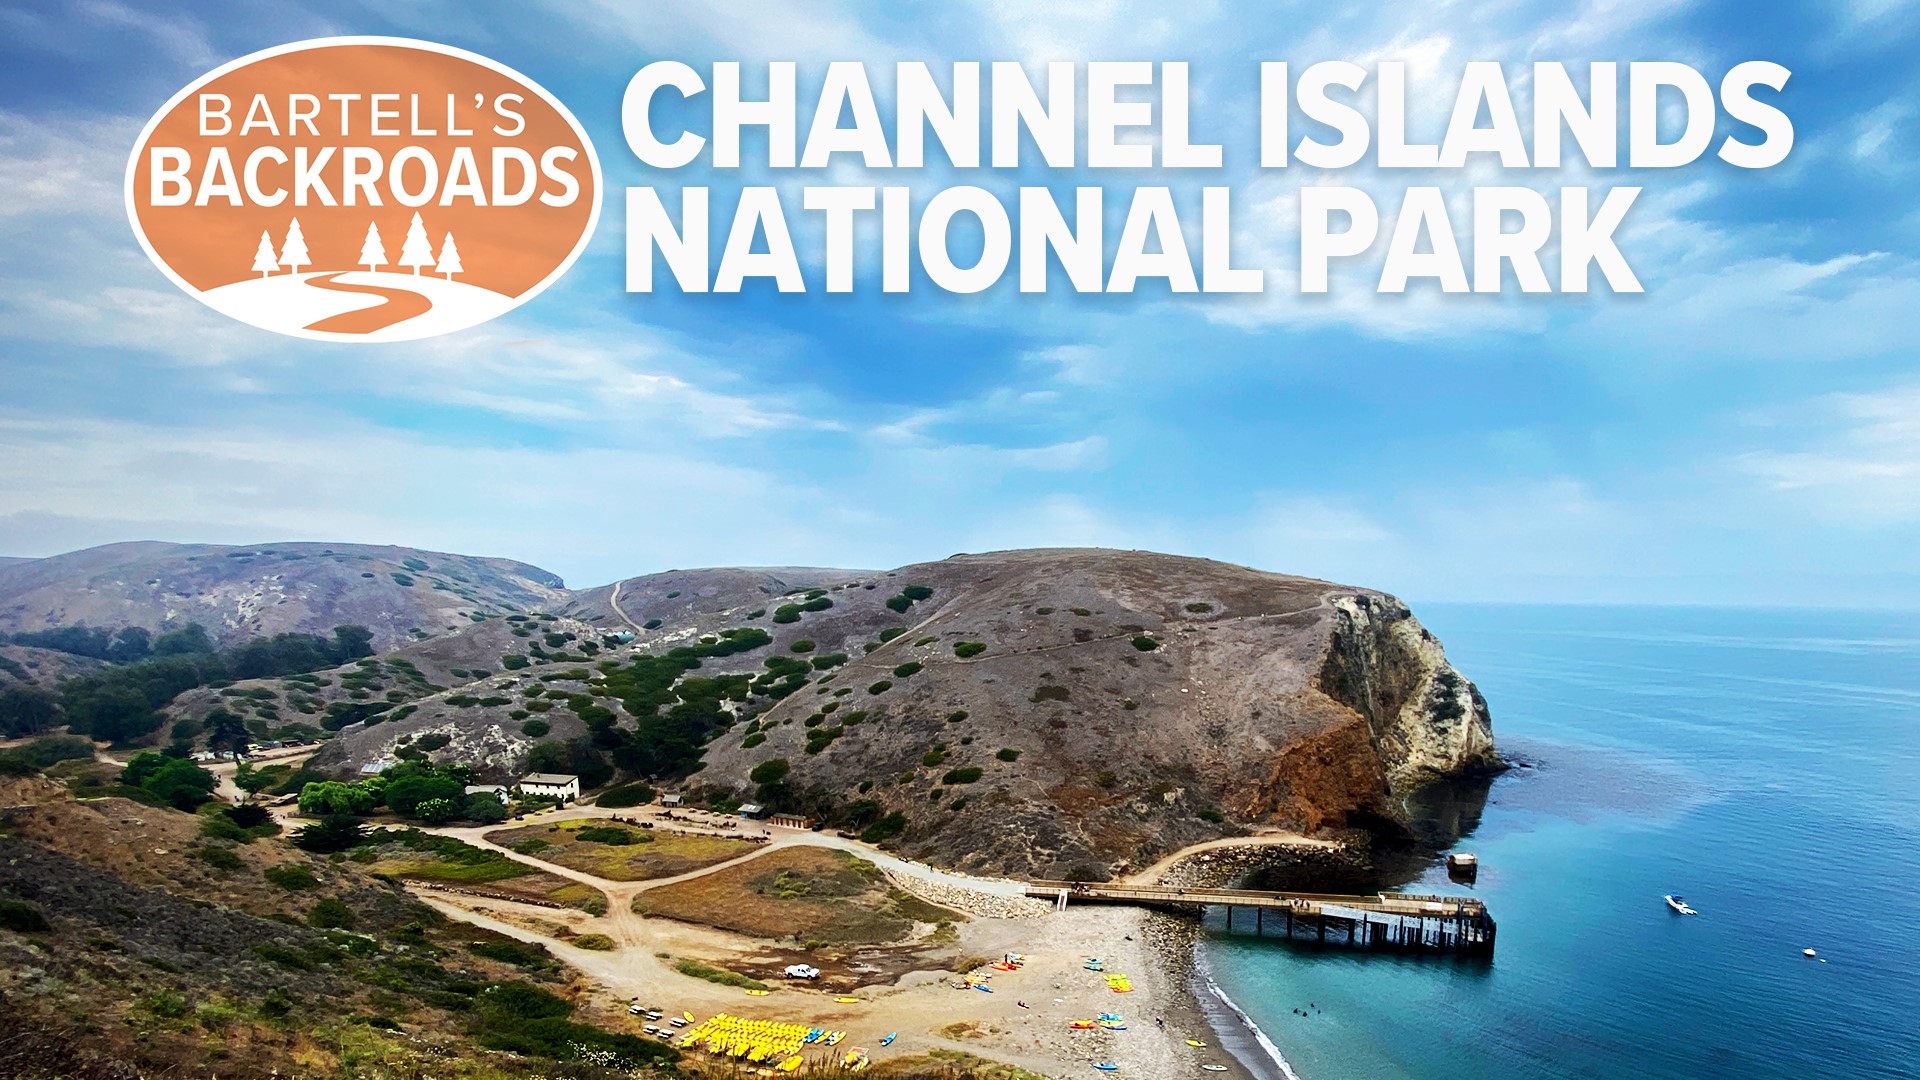 Channel Islands National Park gives a glimpse of what California used to be with a rugged terrain isolating different plants and animals found nowhere else on earth.